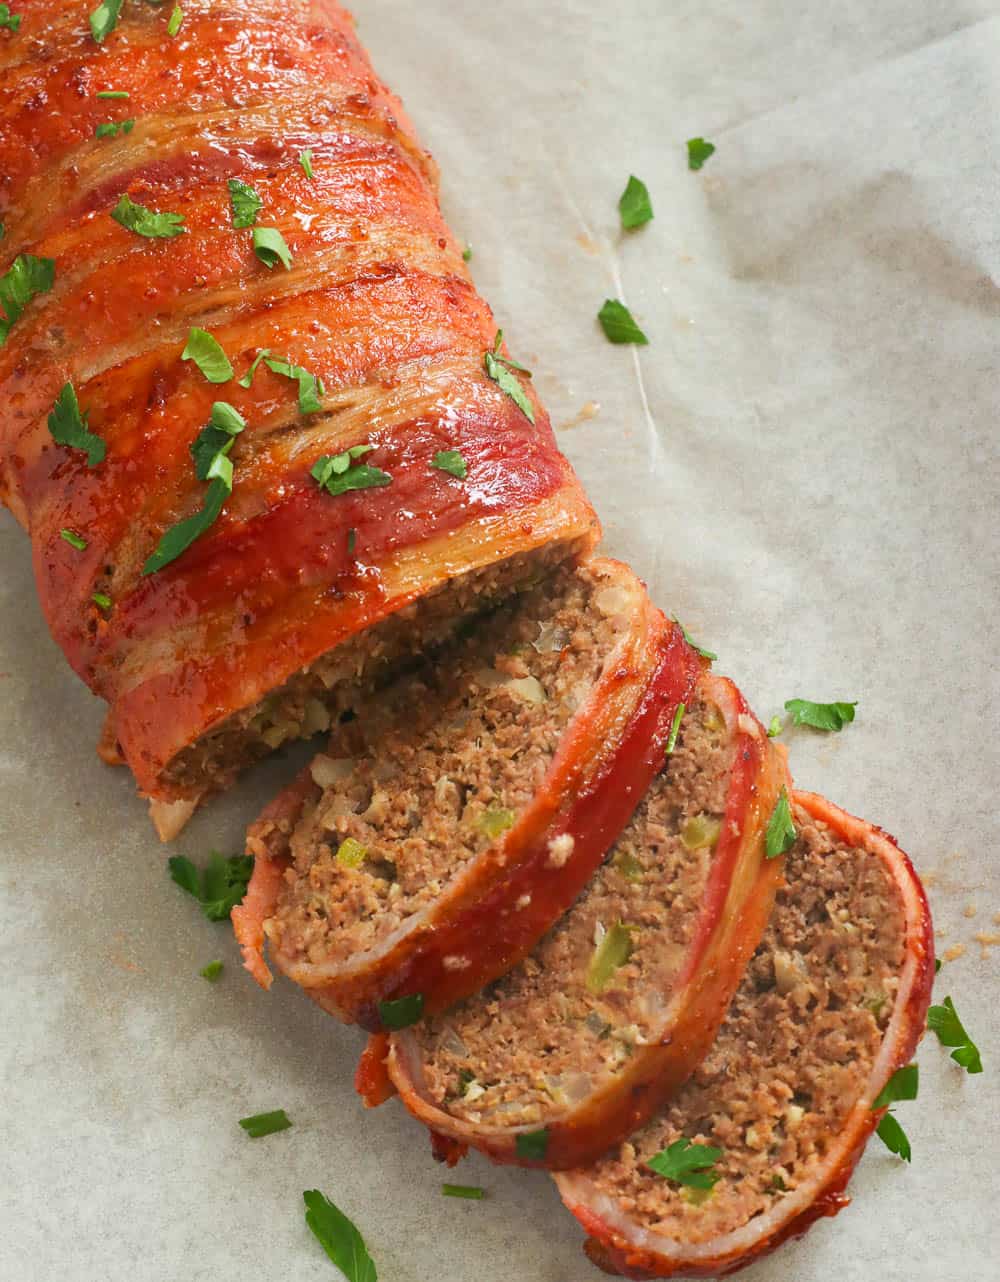 Homemade bacon-wrapped meatloaf garnished with fresh chopped parsley